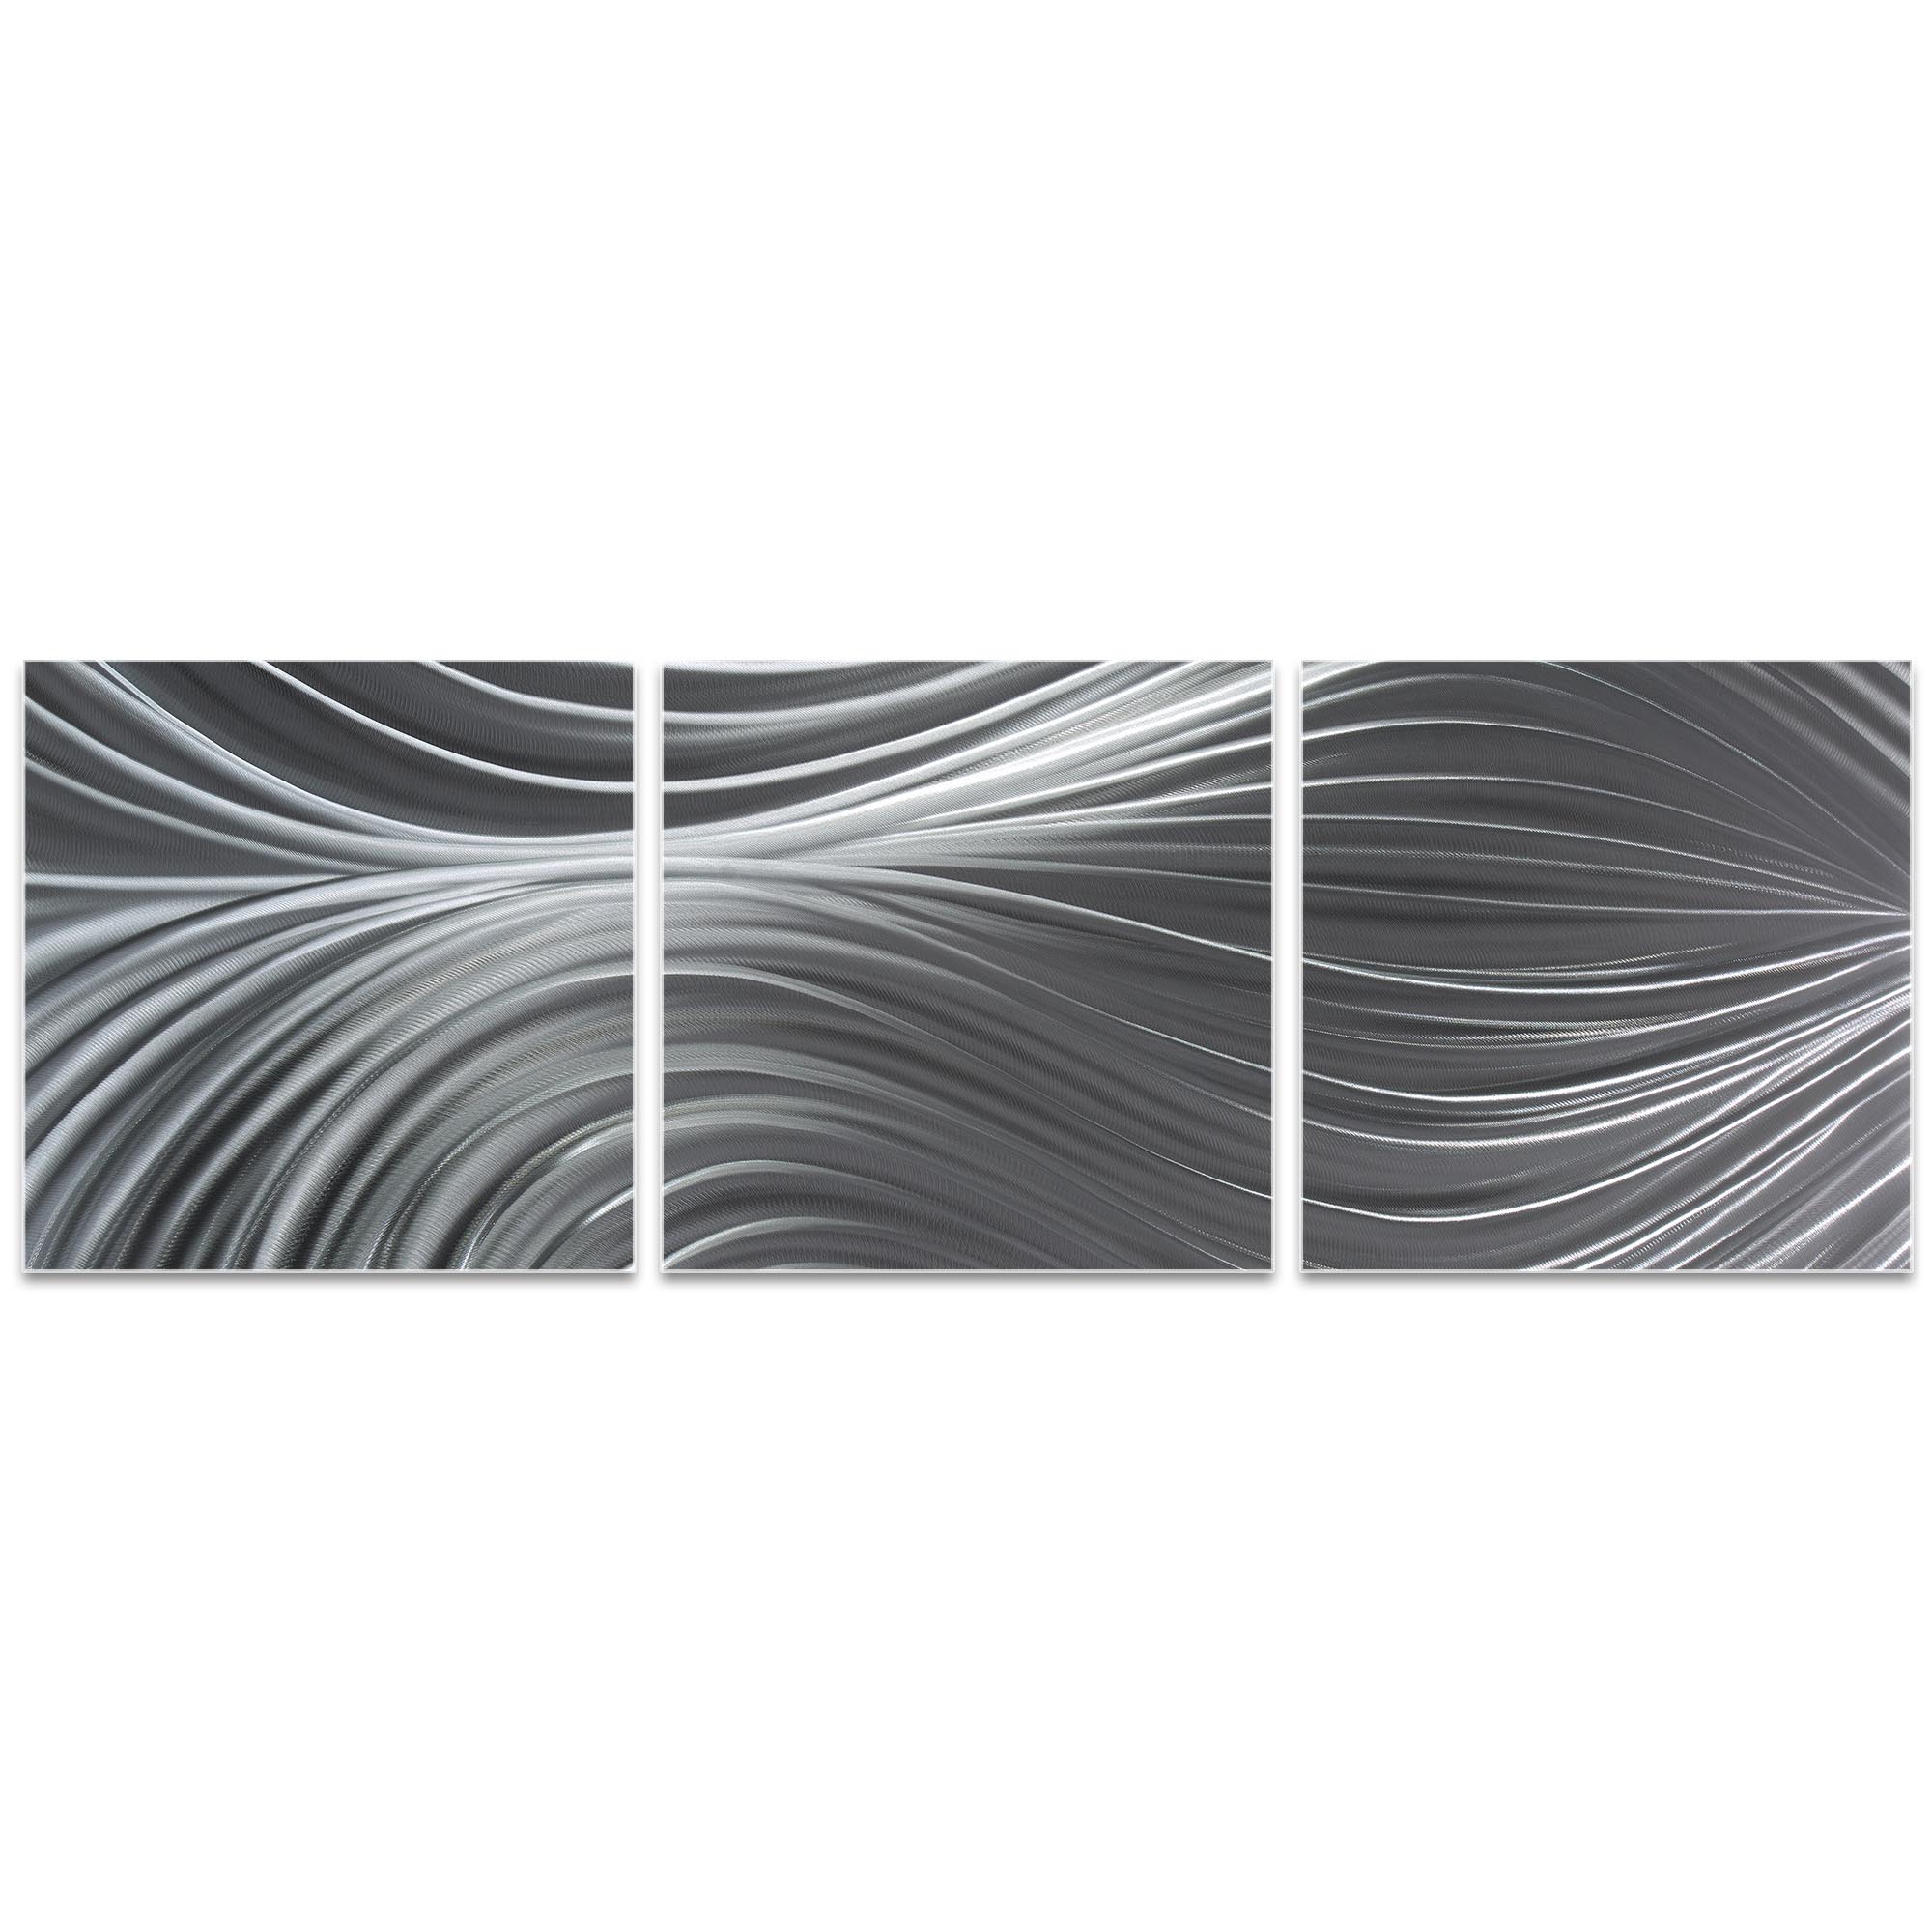 Passing Currents Triptych 38x12in. Metal or Acrylic Contemporary Decor - Image 2